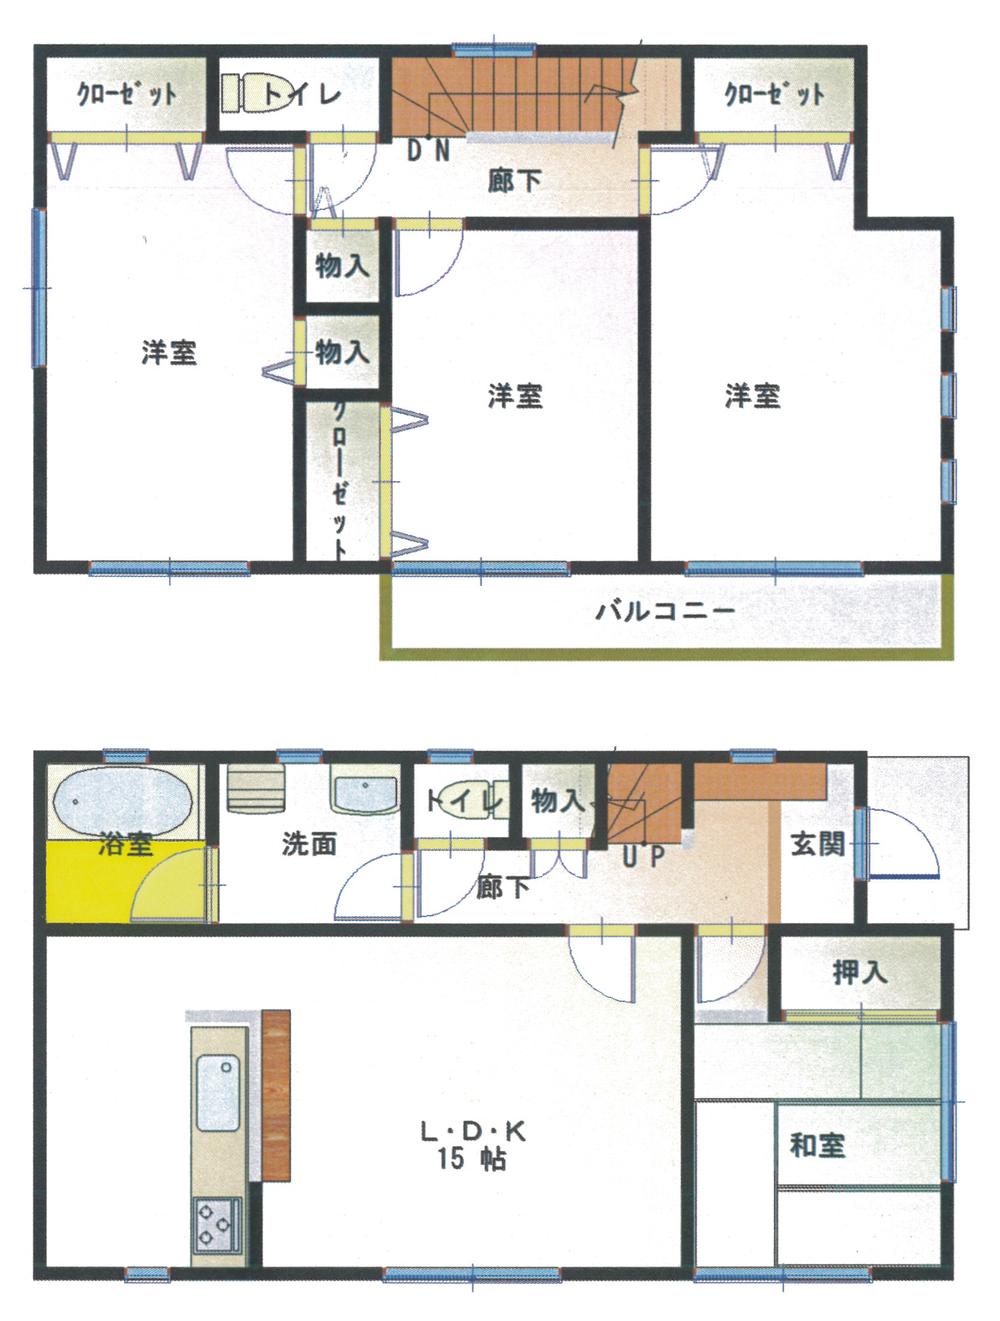 Floor plan. 18.5 million yen, 4LDK, Land area 185.16 sq m , If the building area 98.01 sq m drawings and the present situation is different, it has a priority to the present situation. 